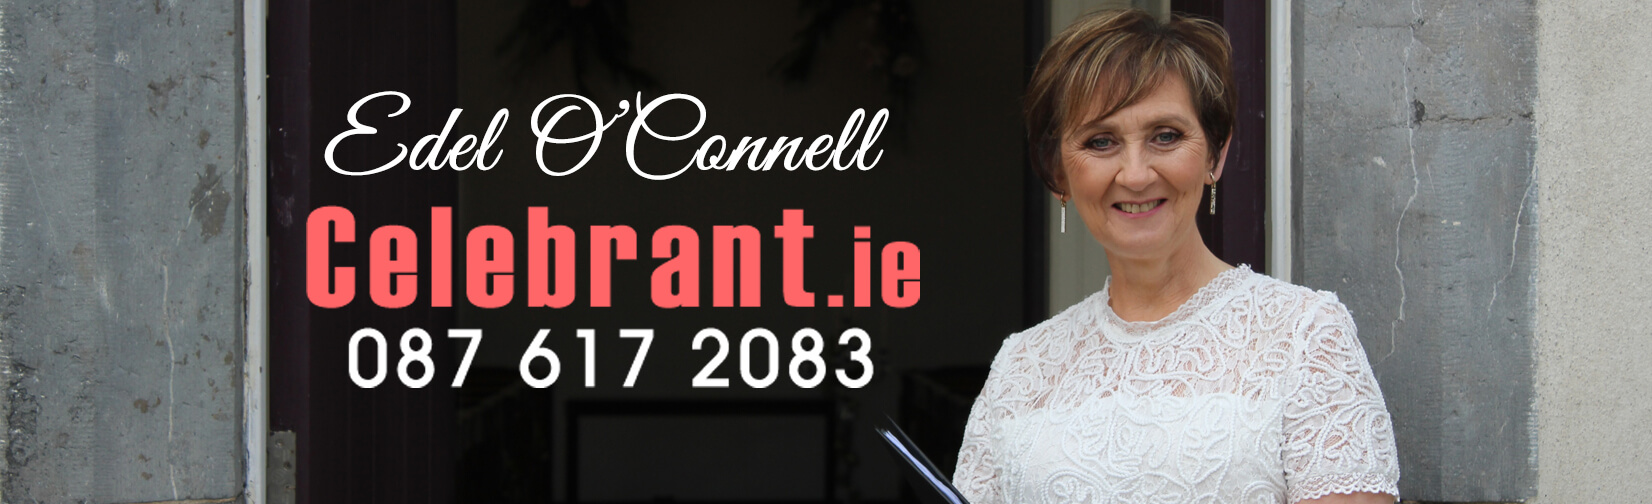 Lorraine McCarthy offers you the opportunity to celebrate your wedding your way